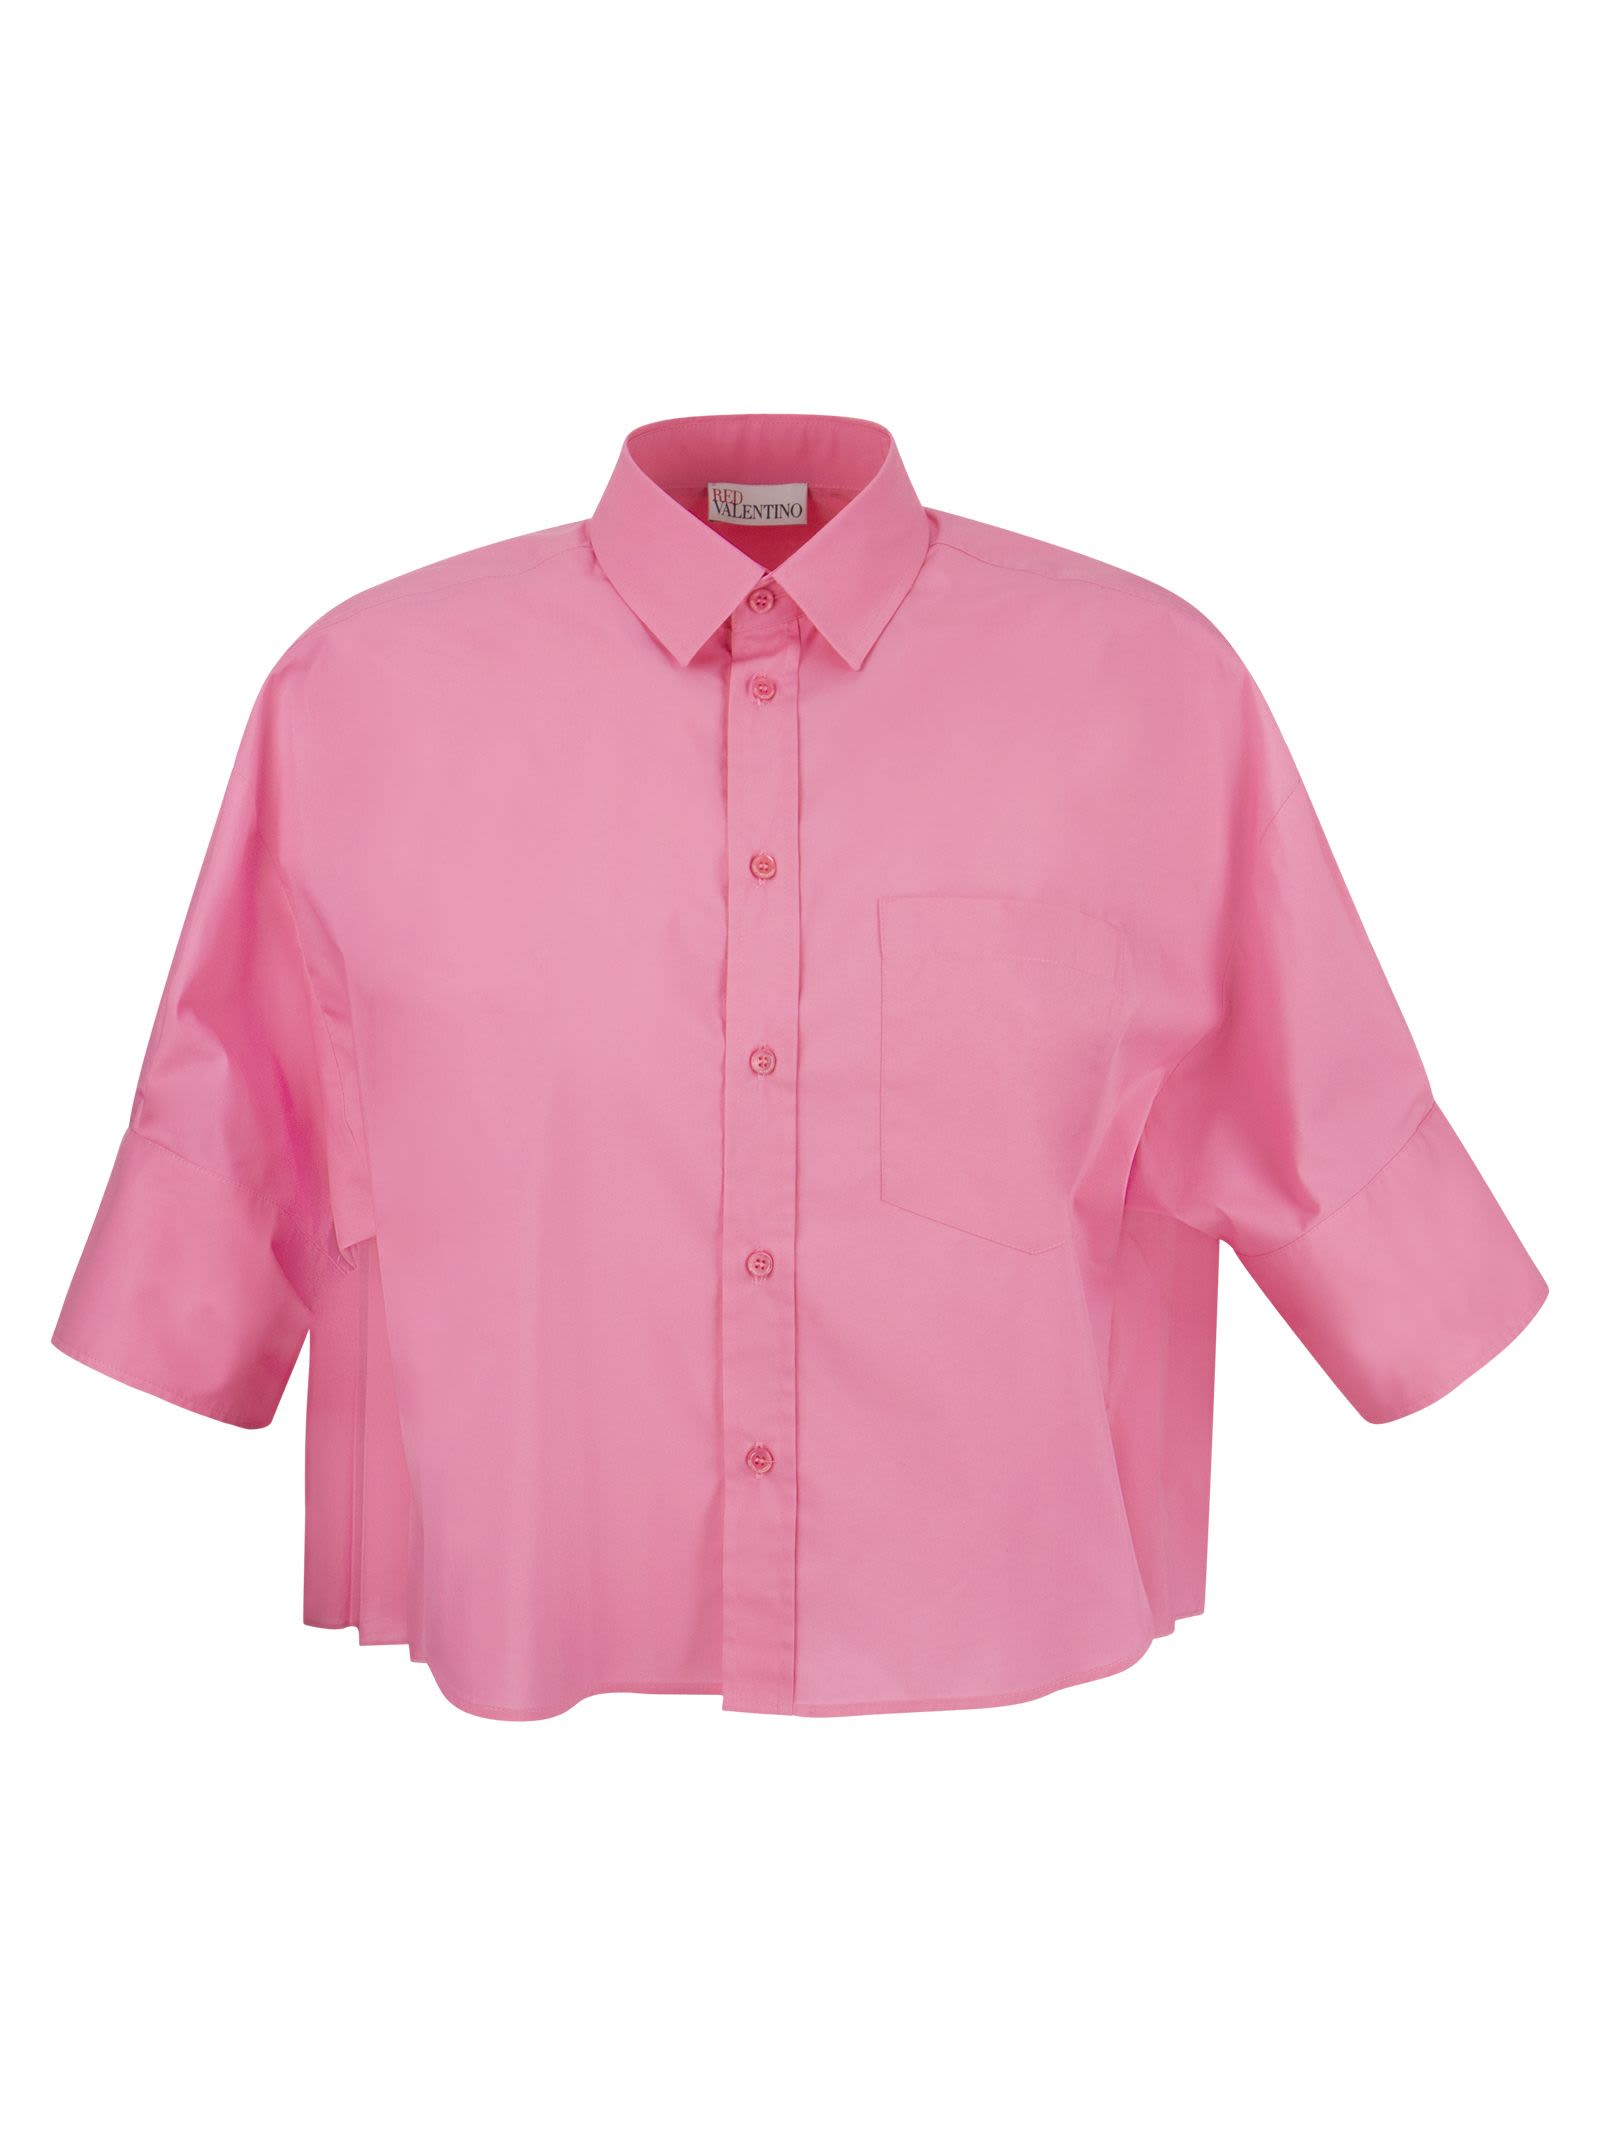 RED Valentino Wide Technical Cotton Shirt